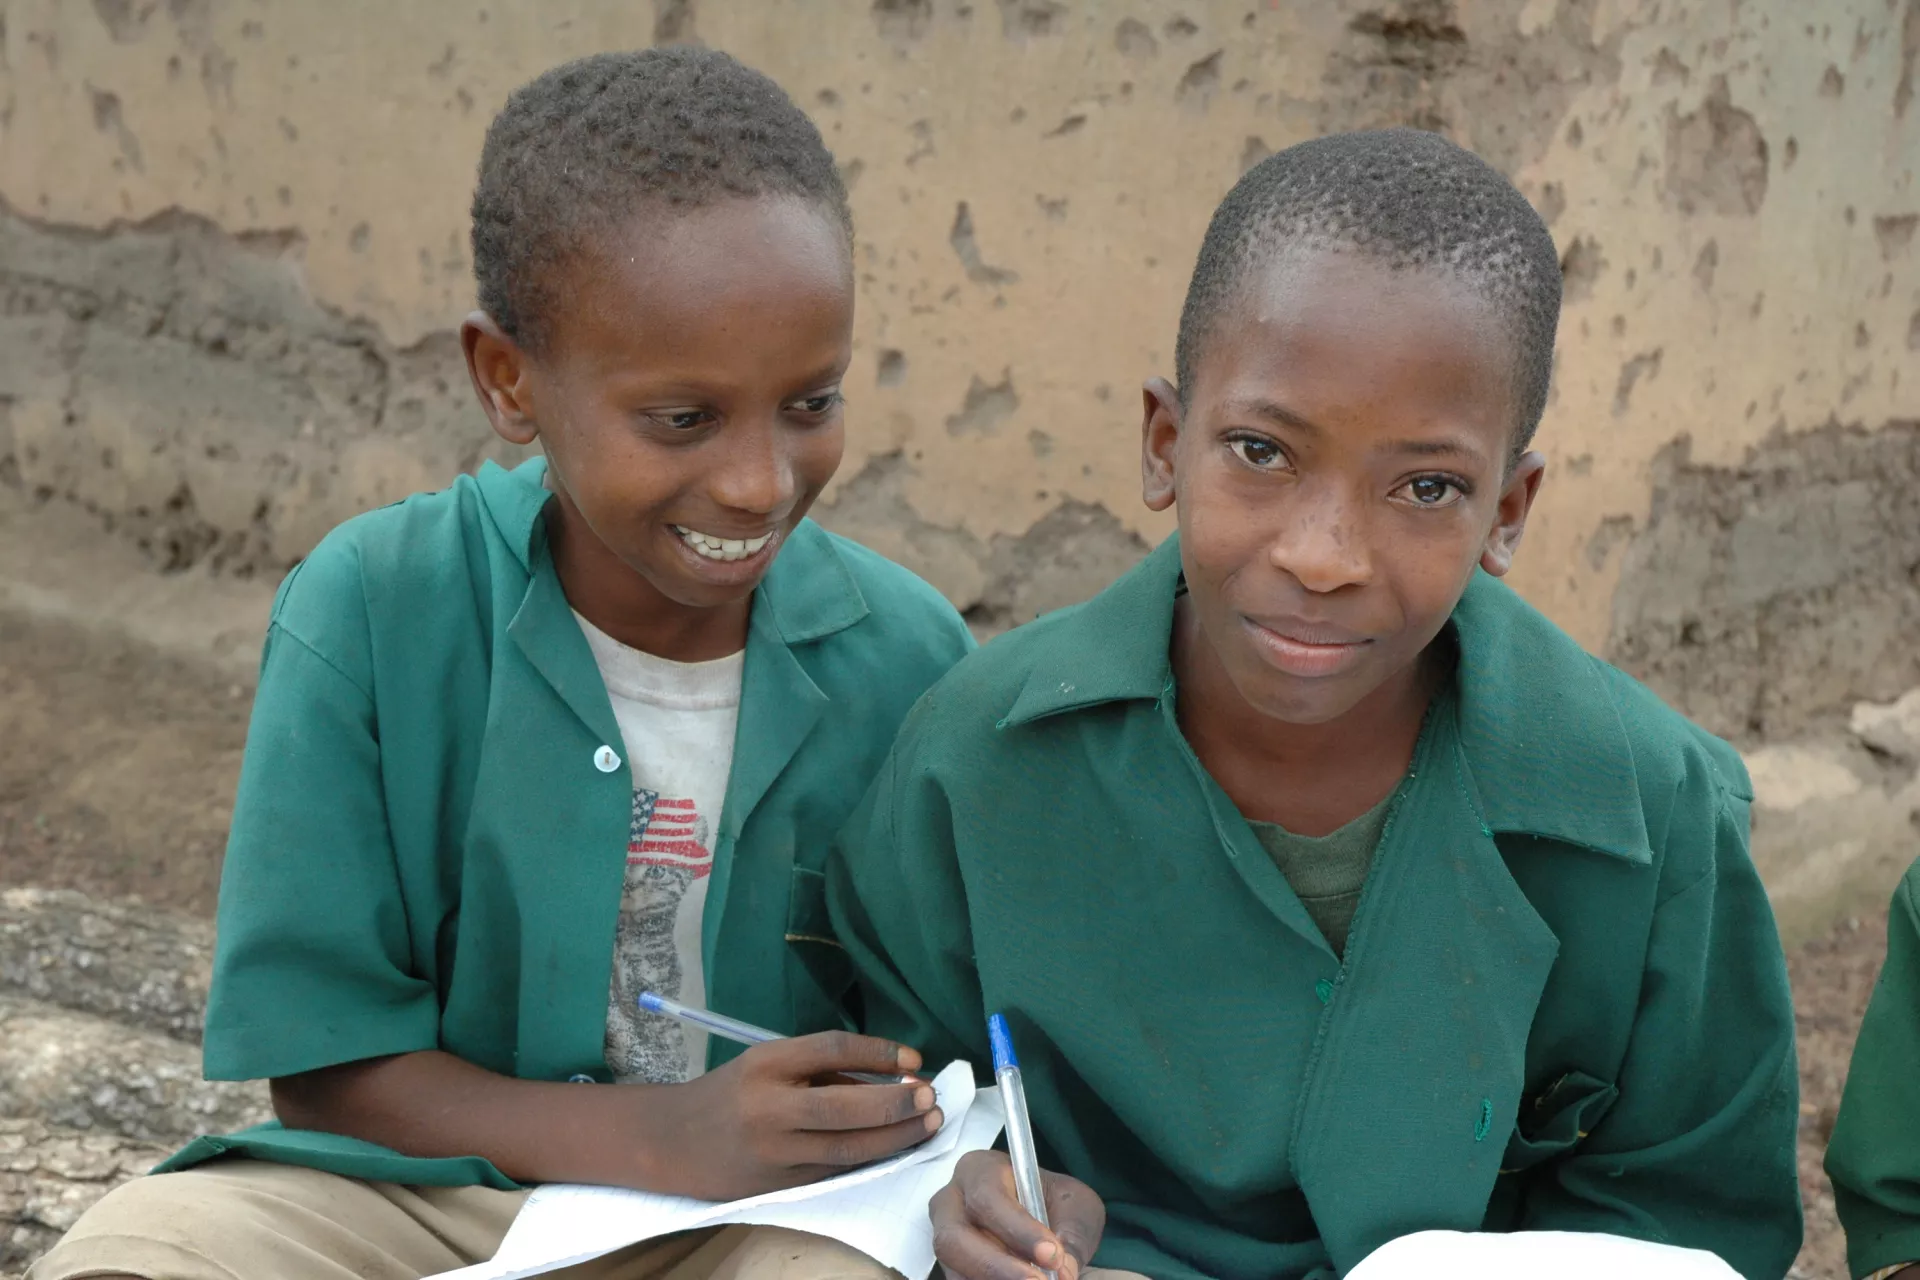 In May 2007, two schoolchildren in Sierra Leone’s Koinadugu district are doing their homework together. 